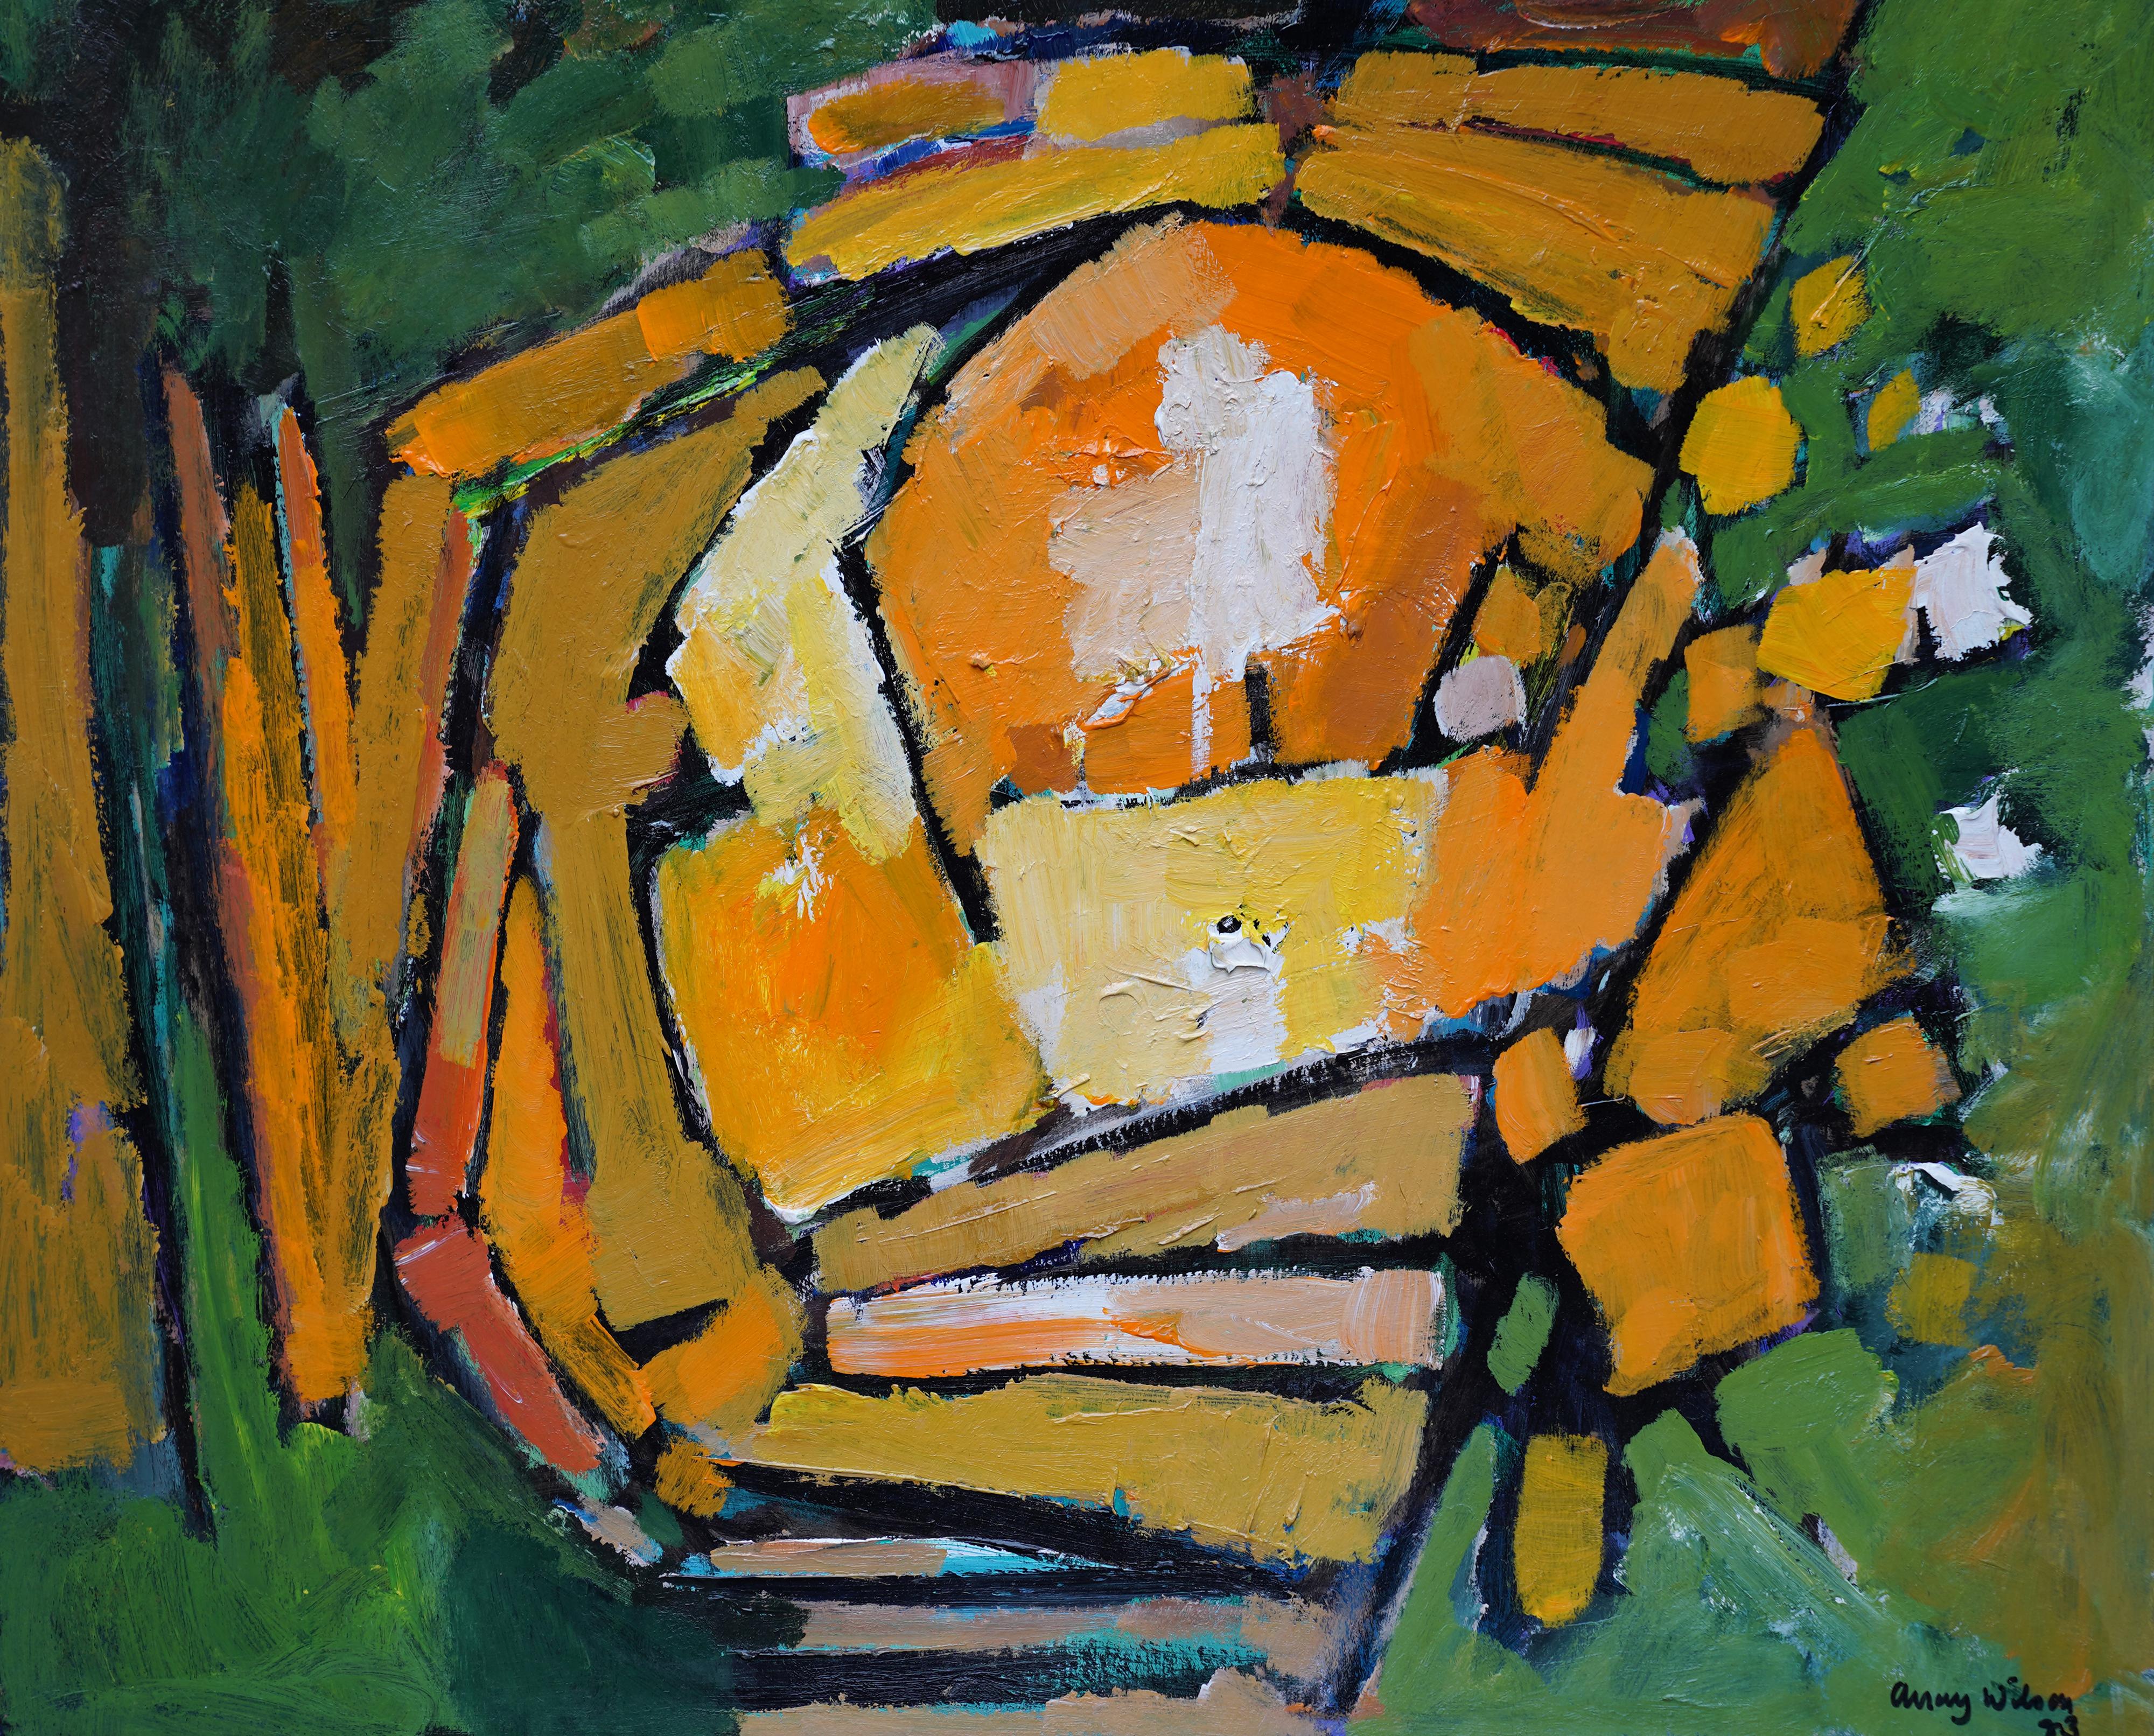 Abstract 1983 - Green Yellow - British 20th century Action art oil painting  - Painting by Frank Avray Wilson 